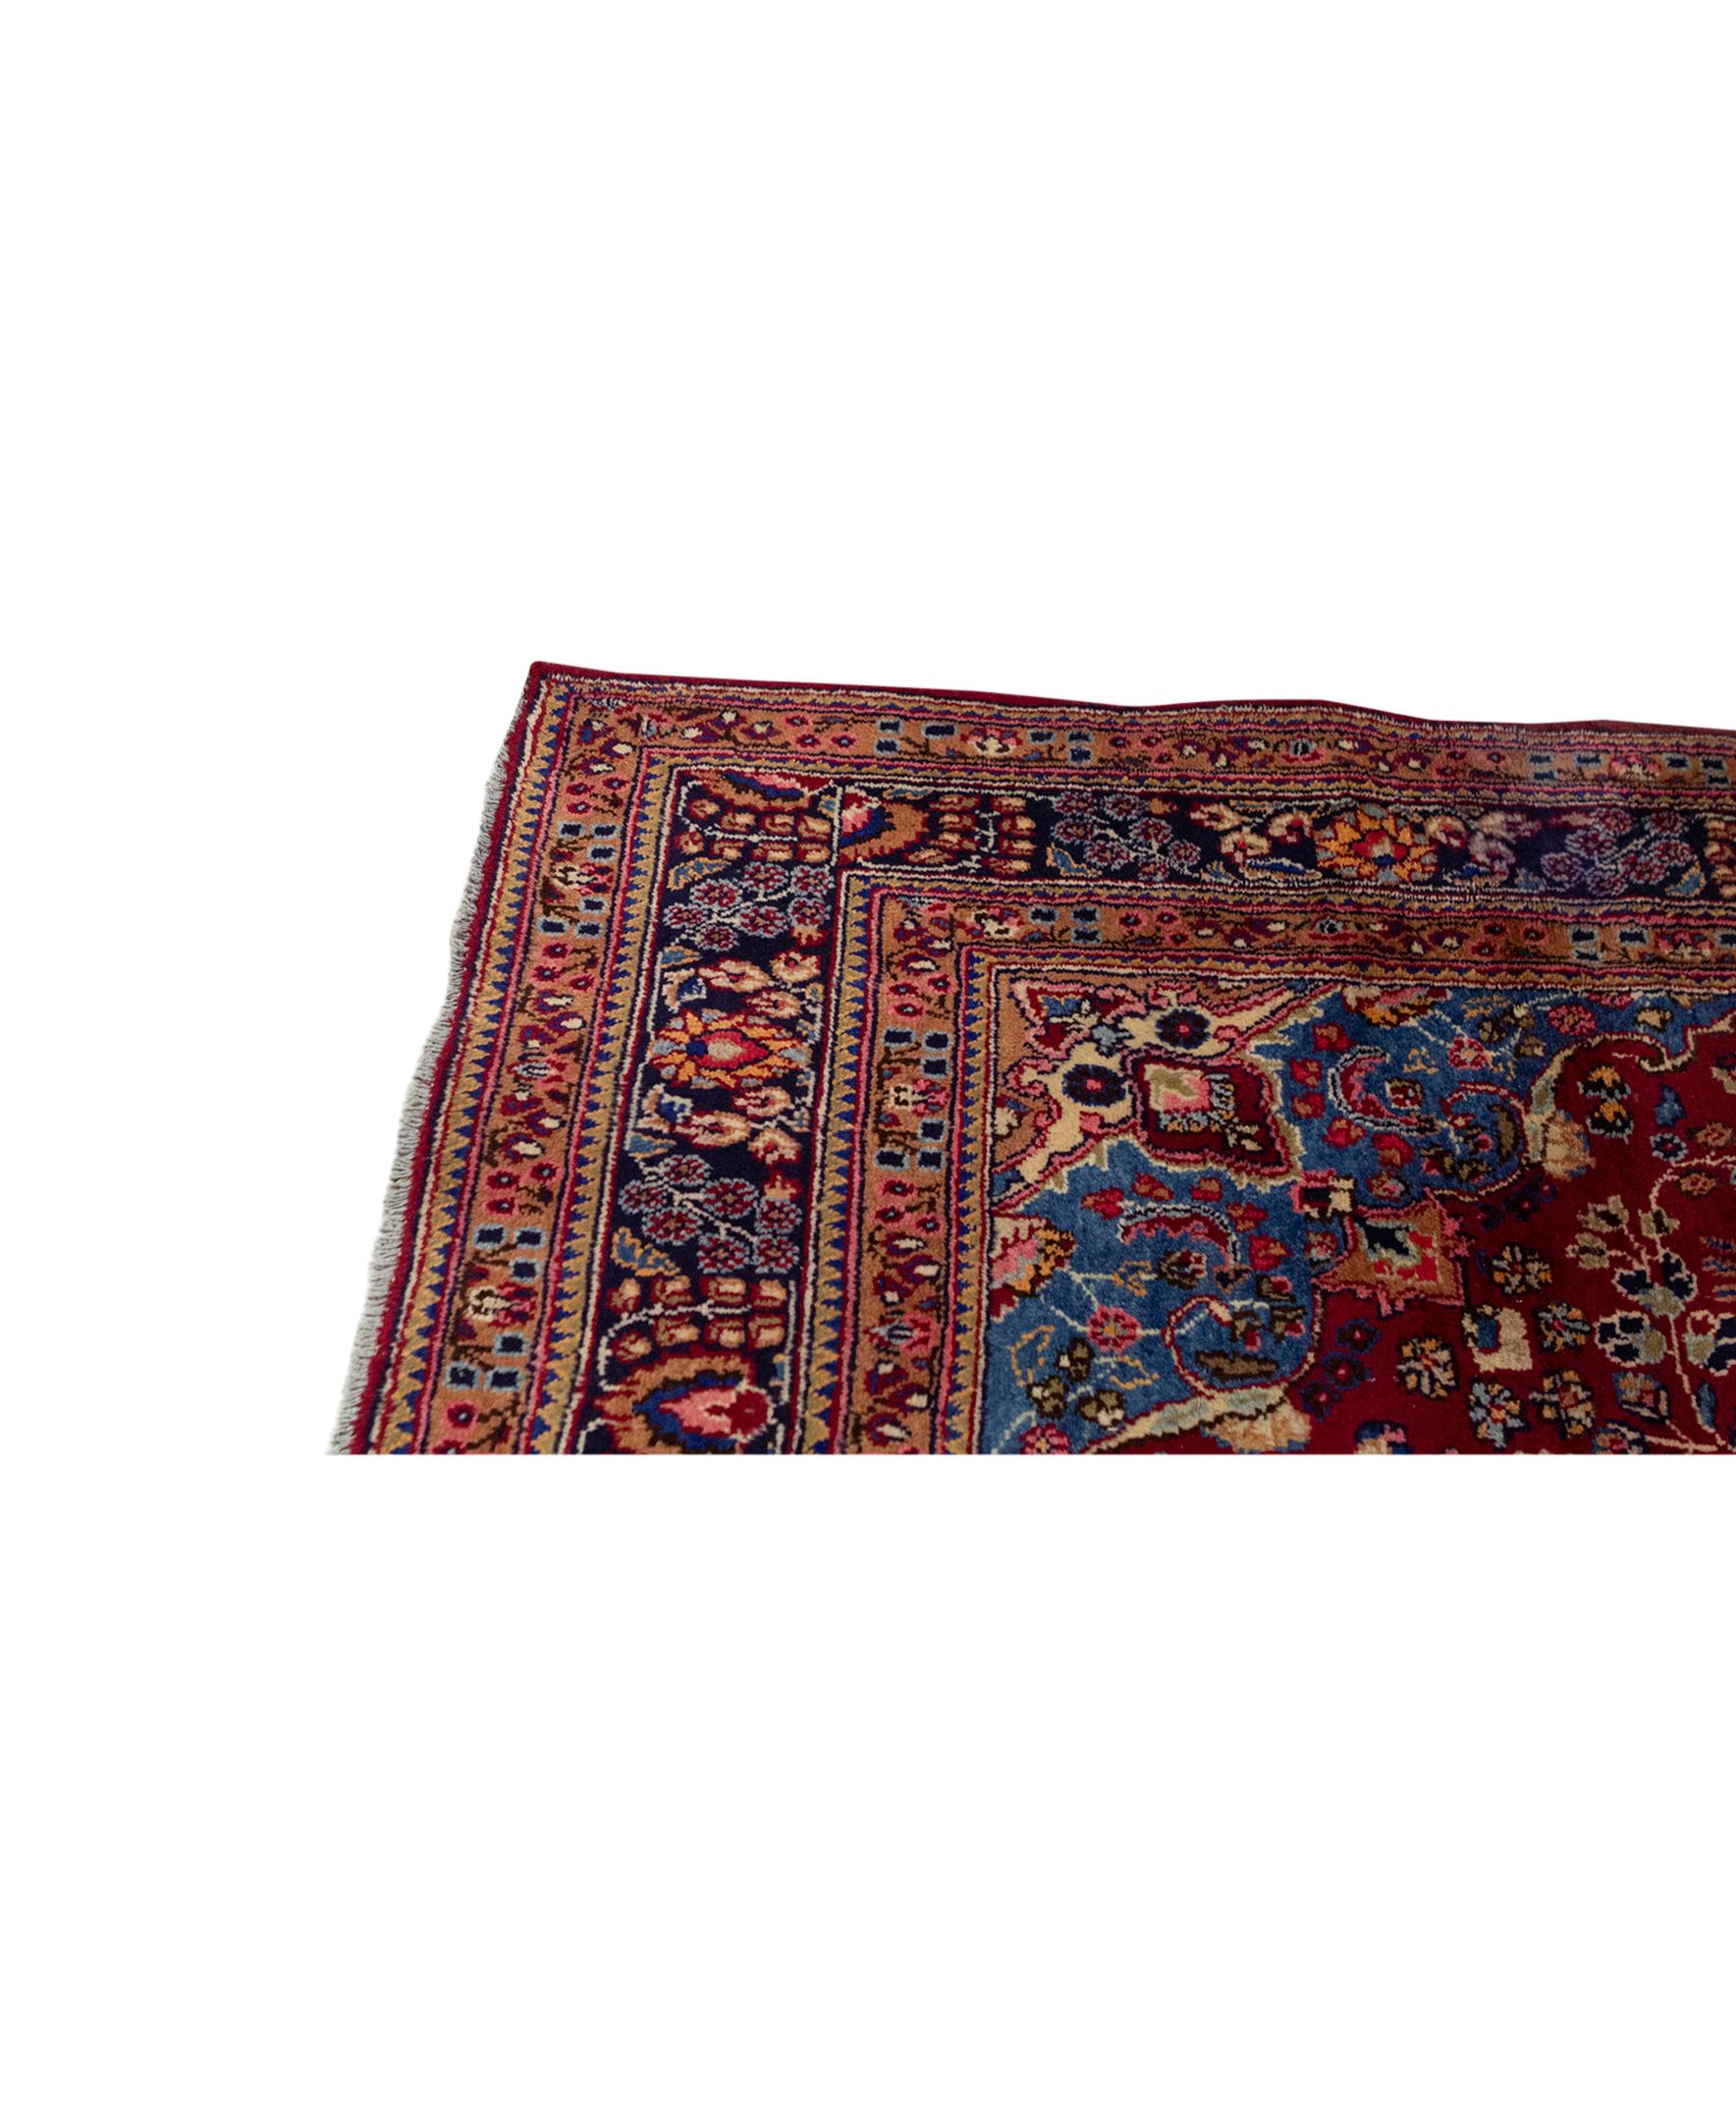 Hand-Woven   Antique Persian Fine Traditional Handwoven Luxury Wool Red Rug